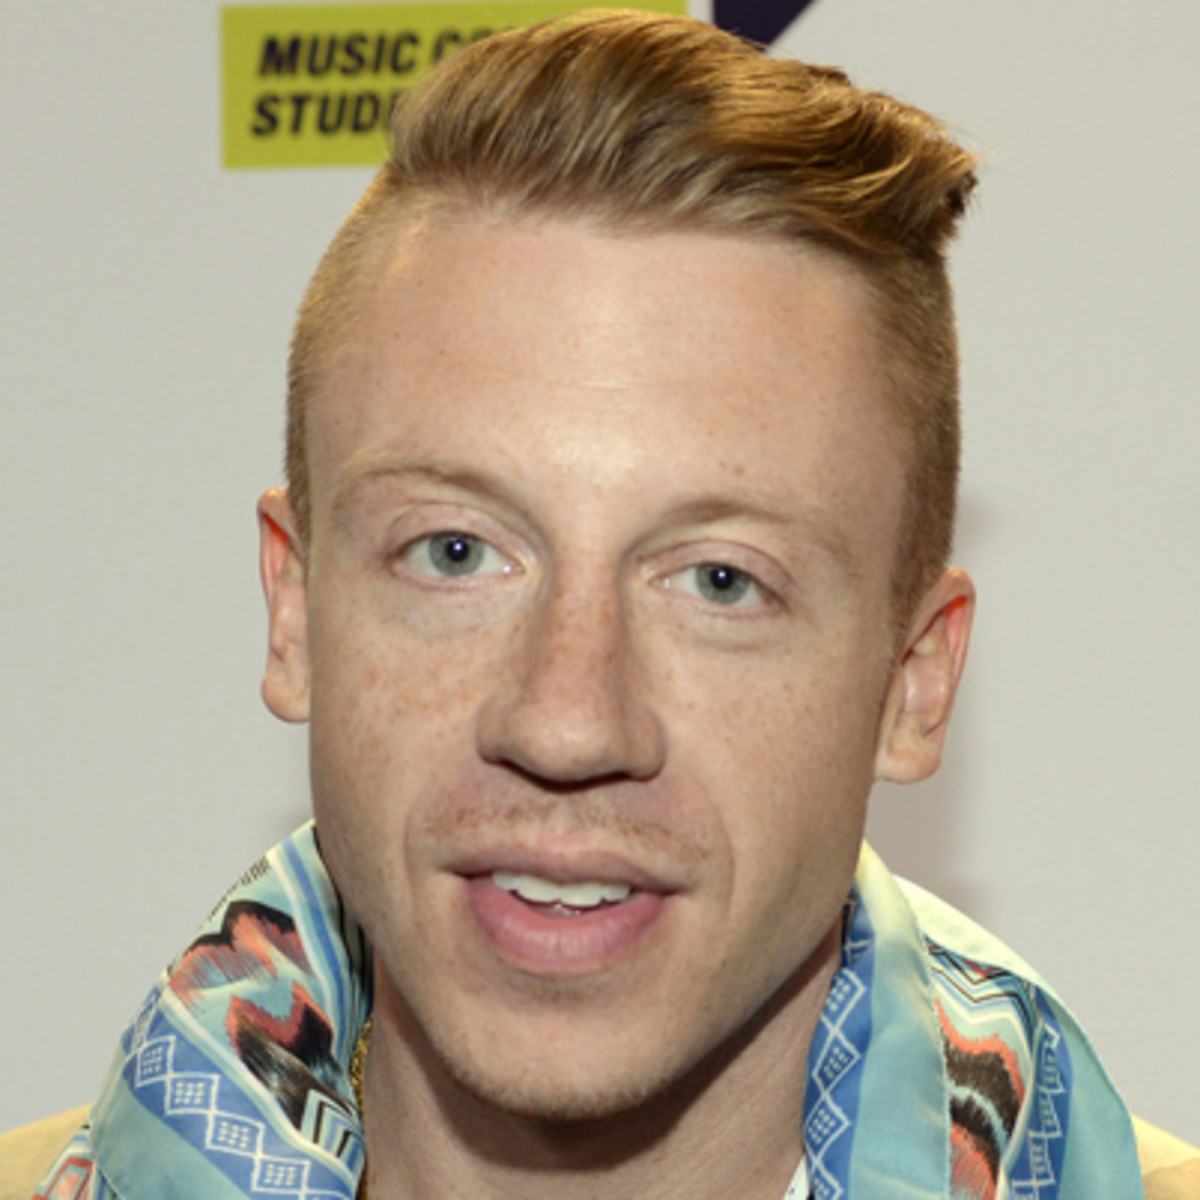 How tall is Macklemore?